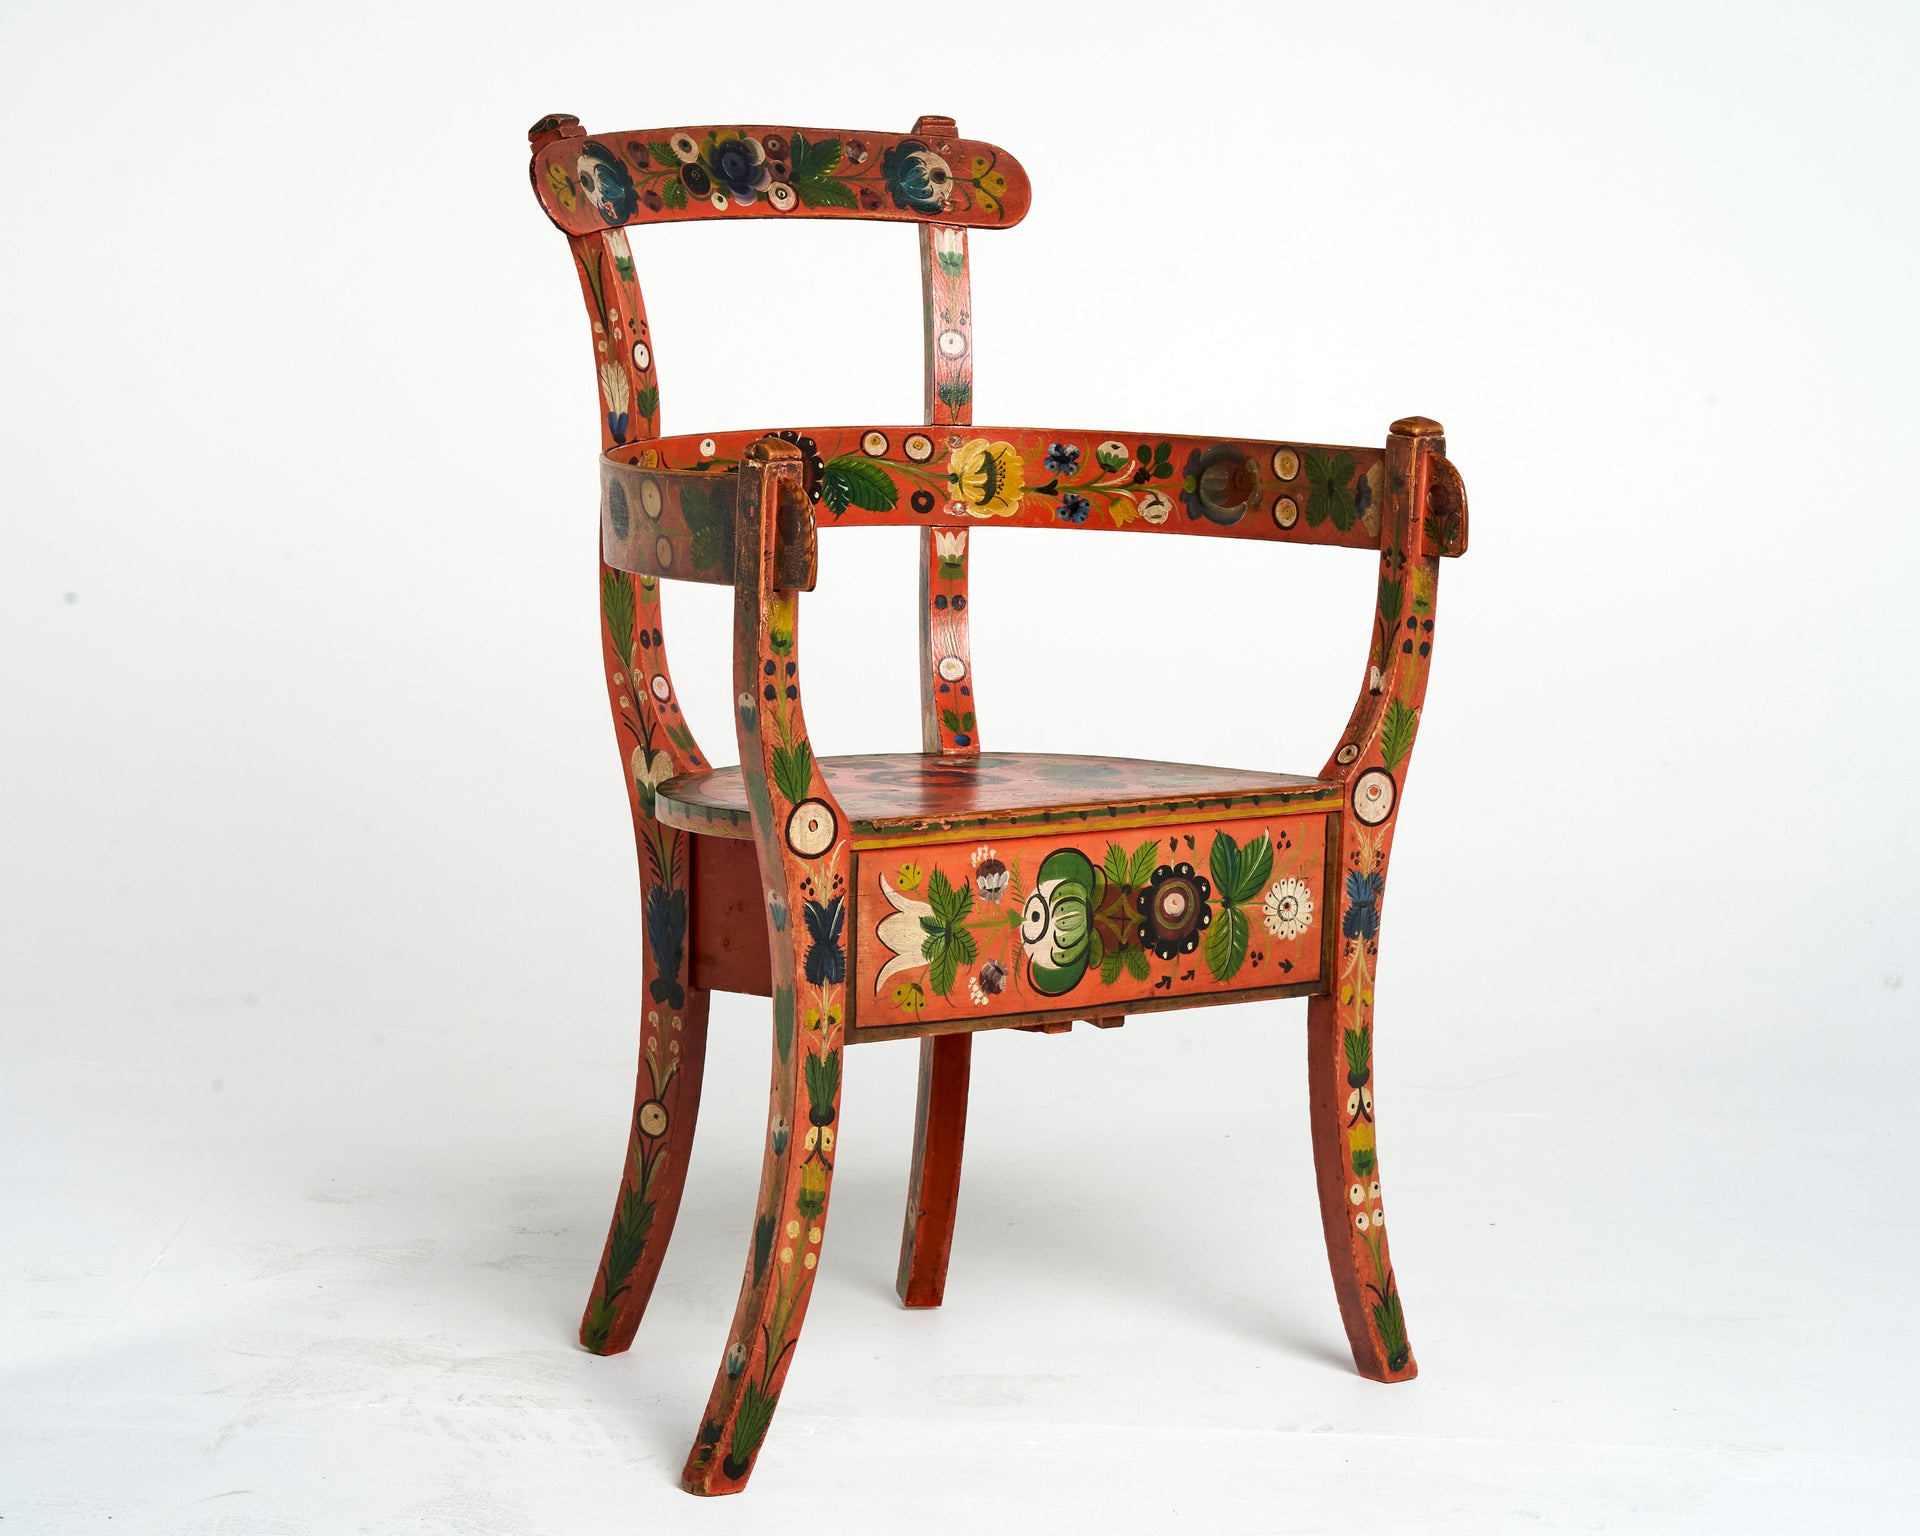 SOLD A unique folk art painted timber armchair, Brittany Region, French 19th Century